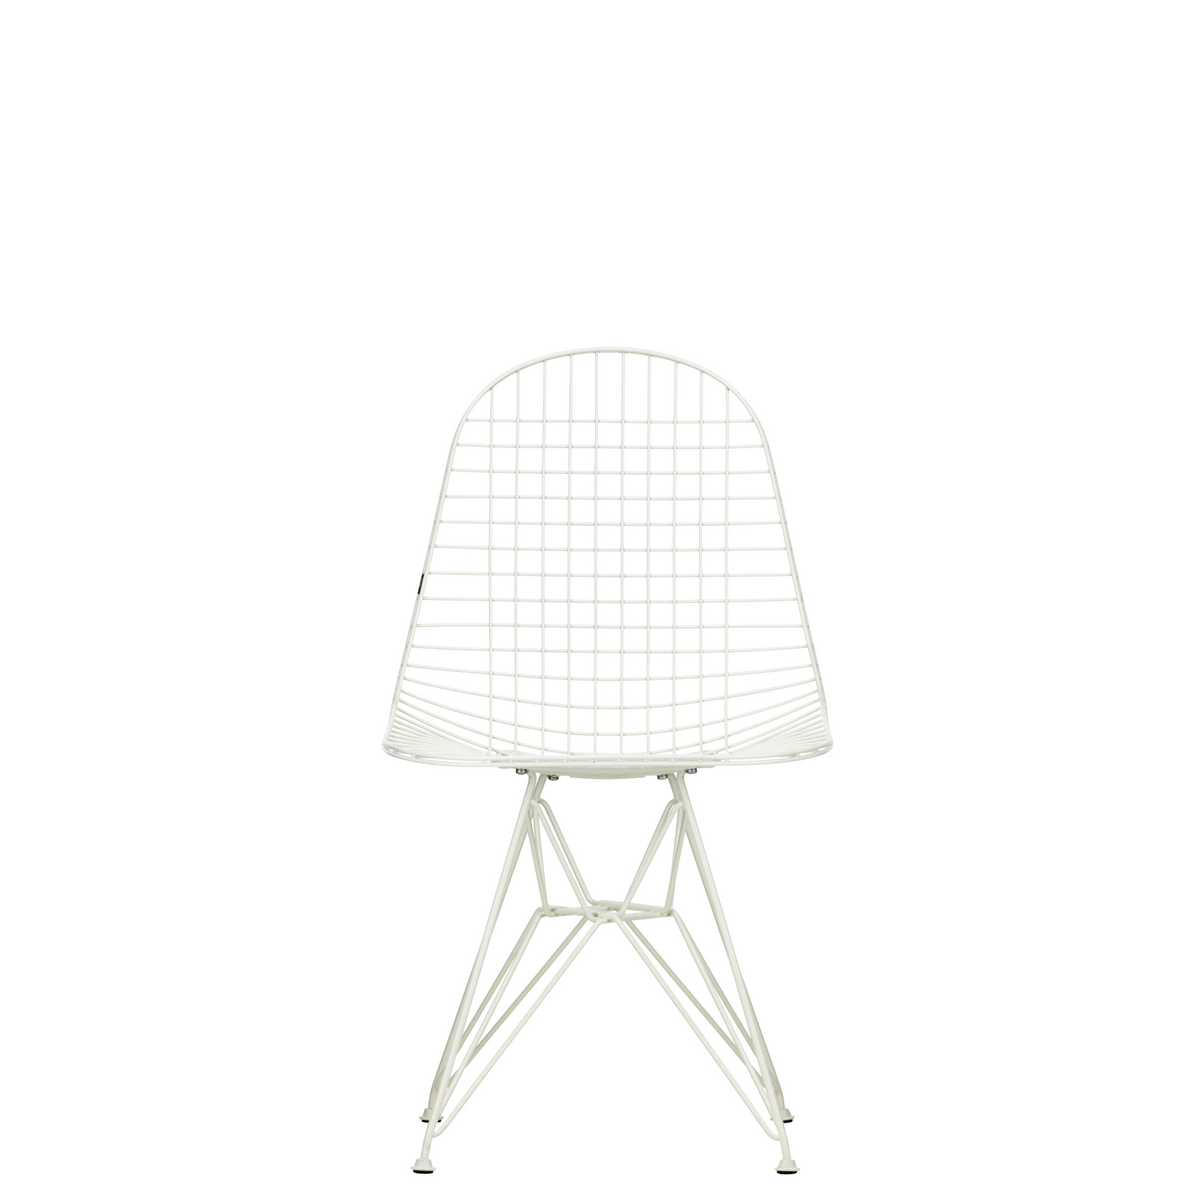 Eames Wire Chair DKR